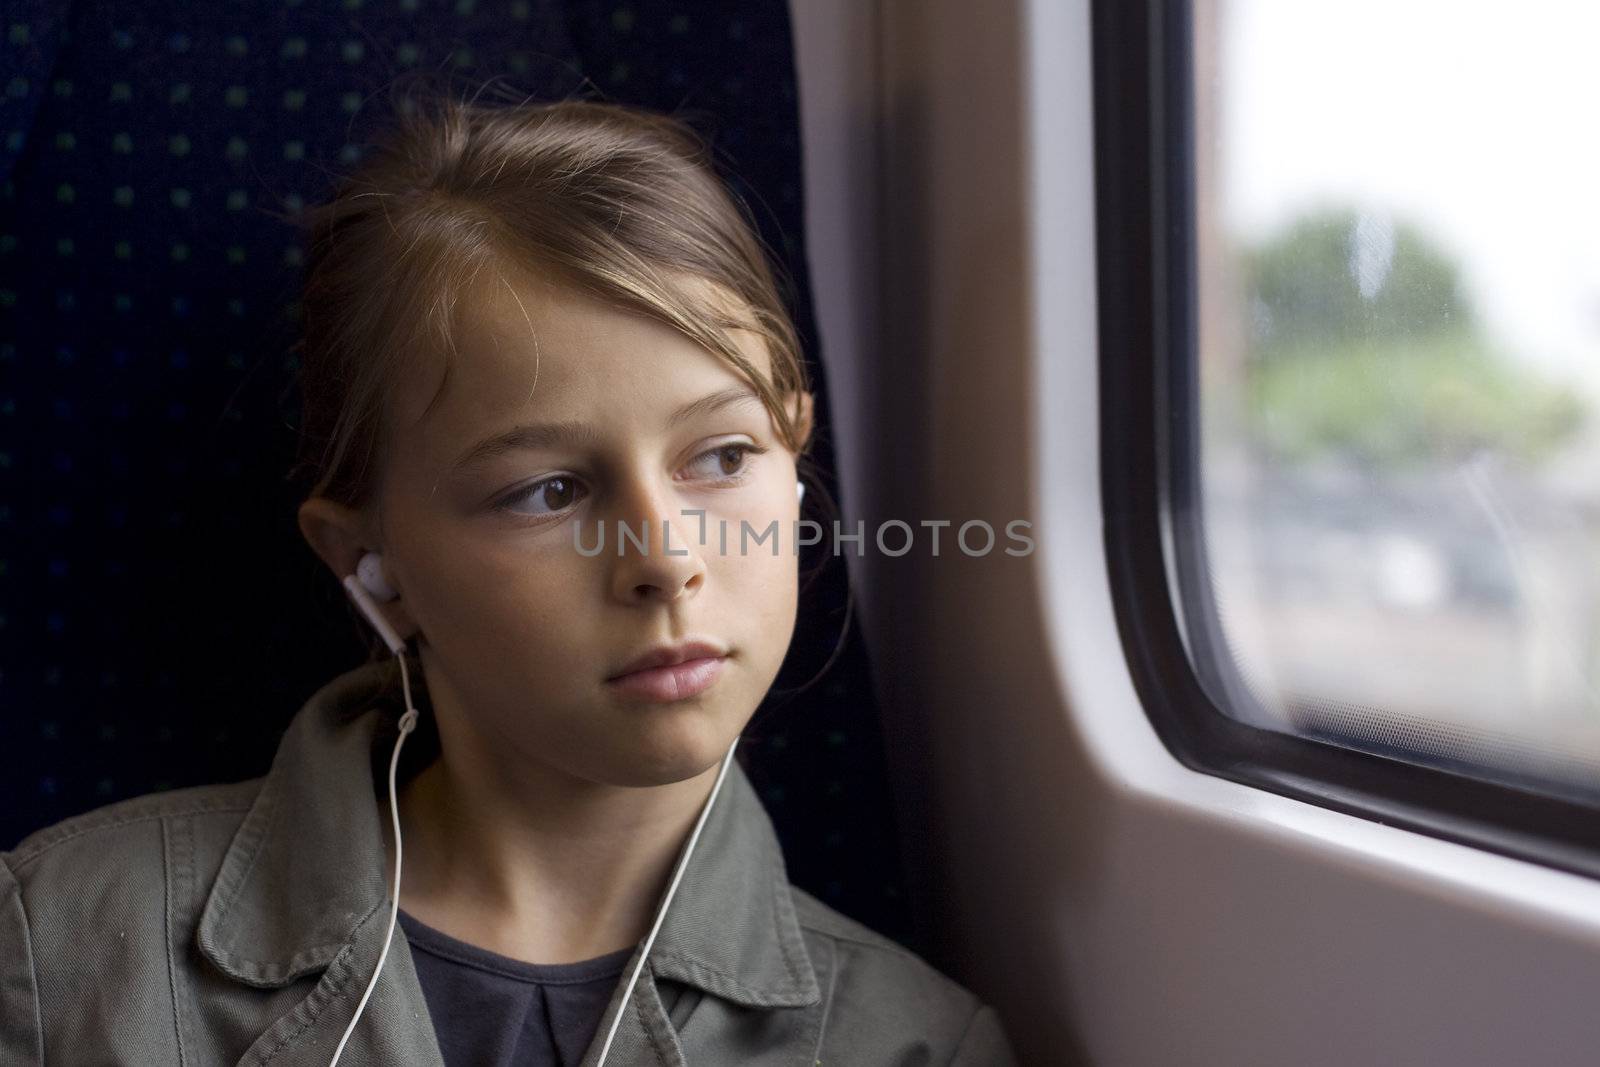 Child with headphones sitting on a bus